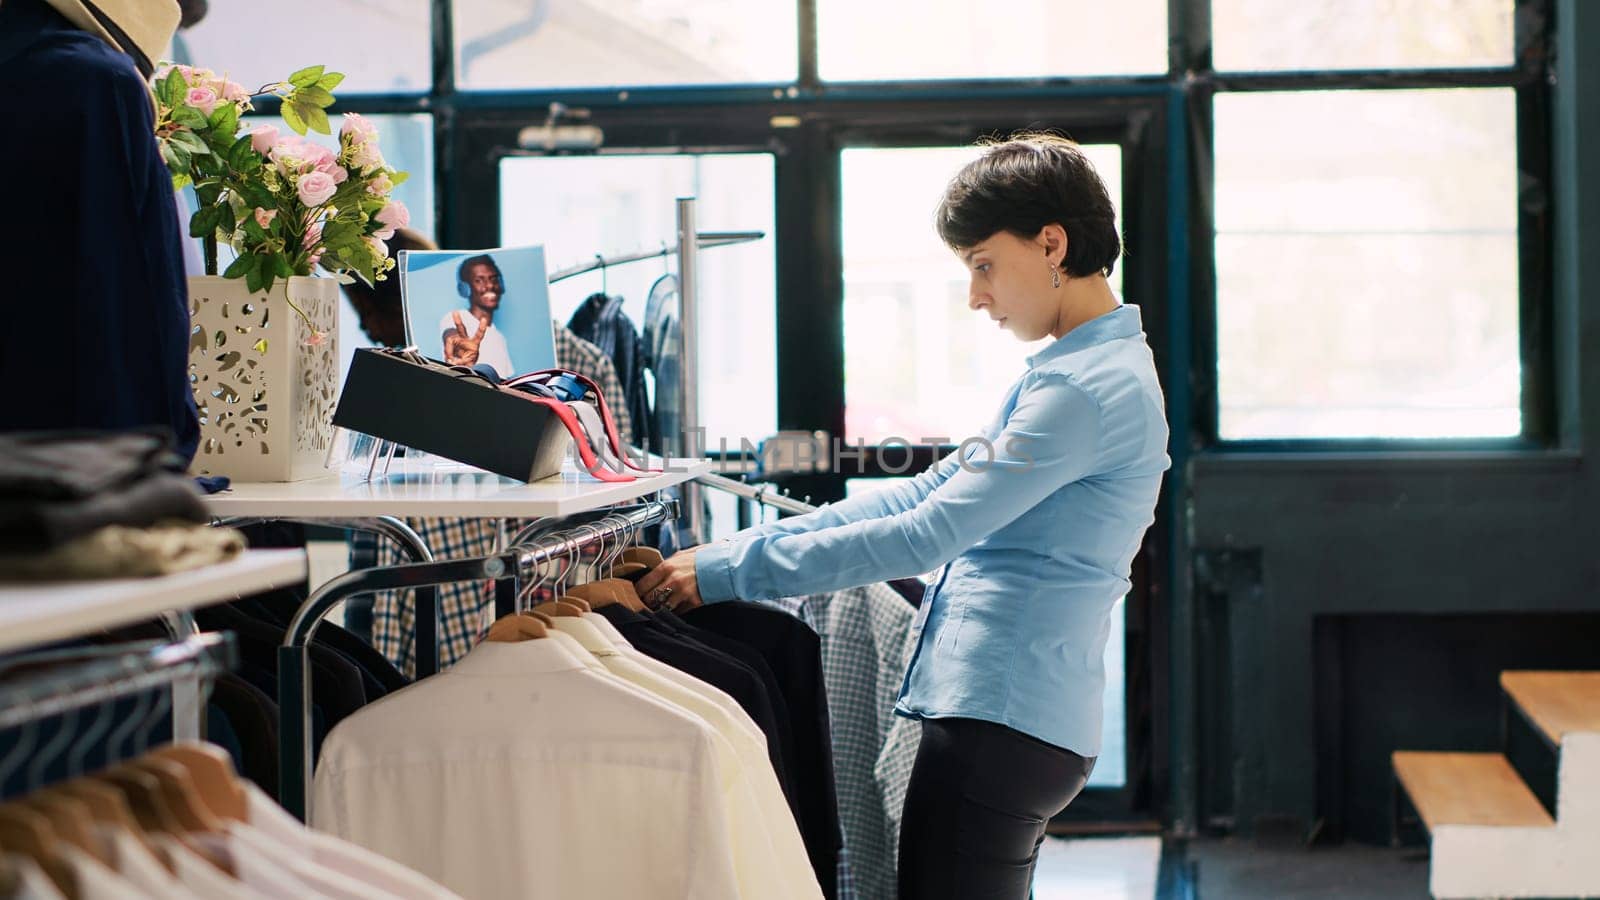 Store employee arranging hangers full with stylish clothes, working at modern boutique visual. Stylish worker putting fashionable merchandise on racks in shopping centre. Fashion concept